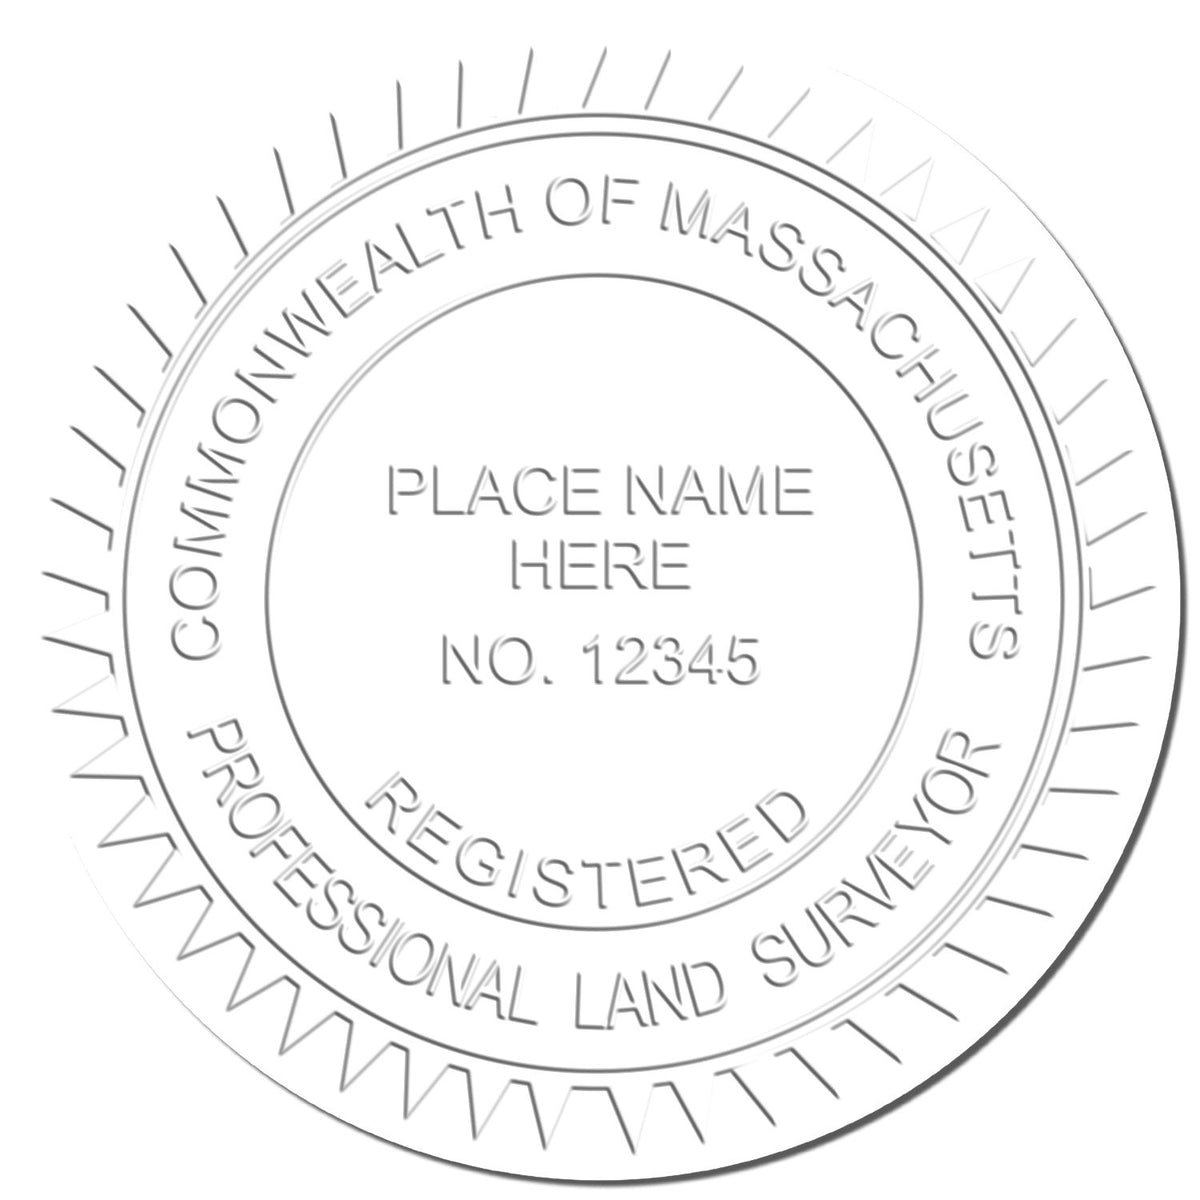 This paper is stamped with a sample imprint of the Hybrid Massachusetts Land Surveyor Seal, signifying its quality and reliability.